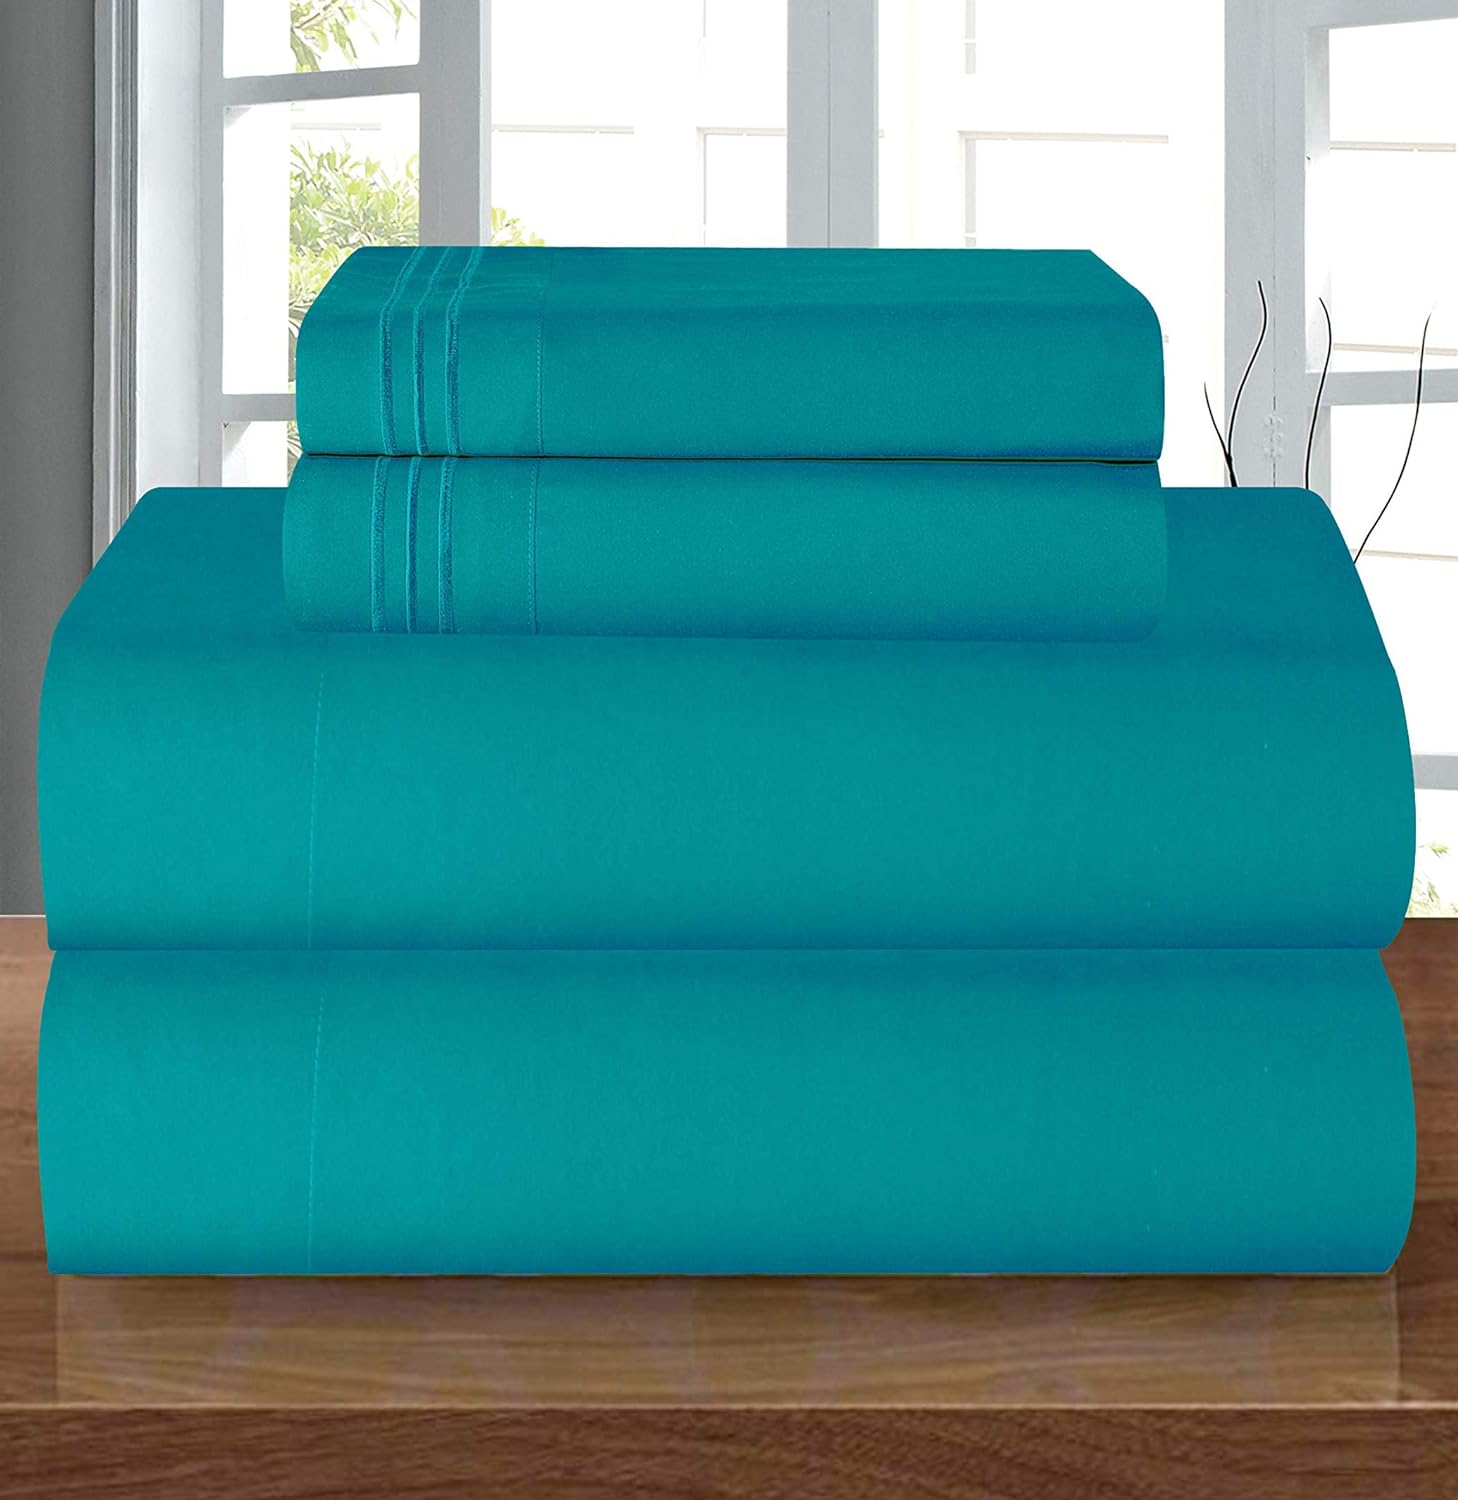 Elegant Comfort Luxury 1500 Premium Hotel Quality Microfiber 4-Piece Sheet Set - Wrinkle Resistant, All Around Elastic Fitted Sheet, Deep Pocket up to 16, Queen, Turquoise